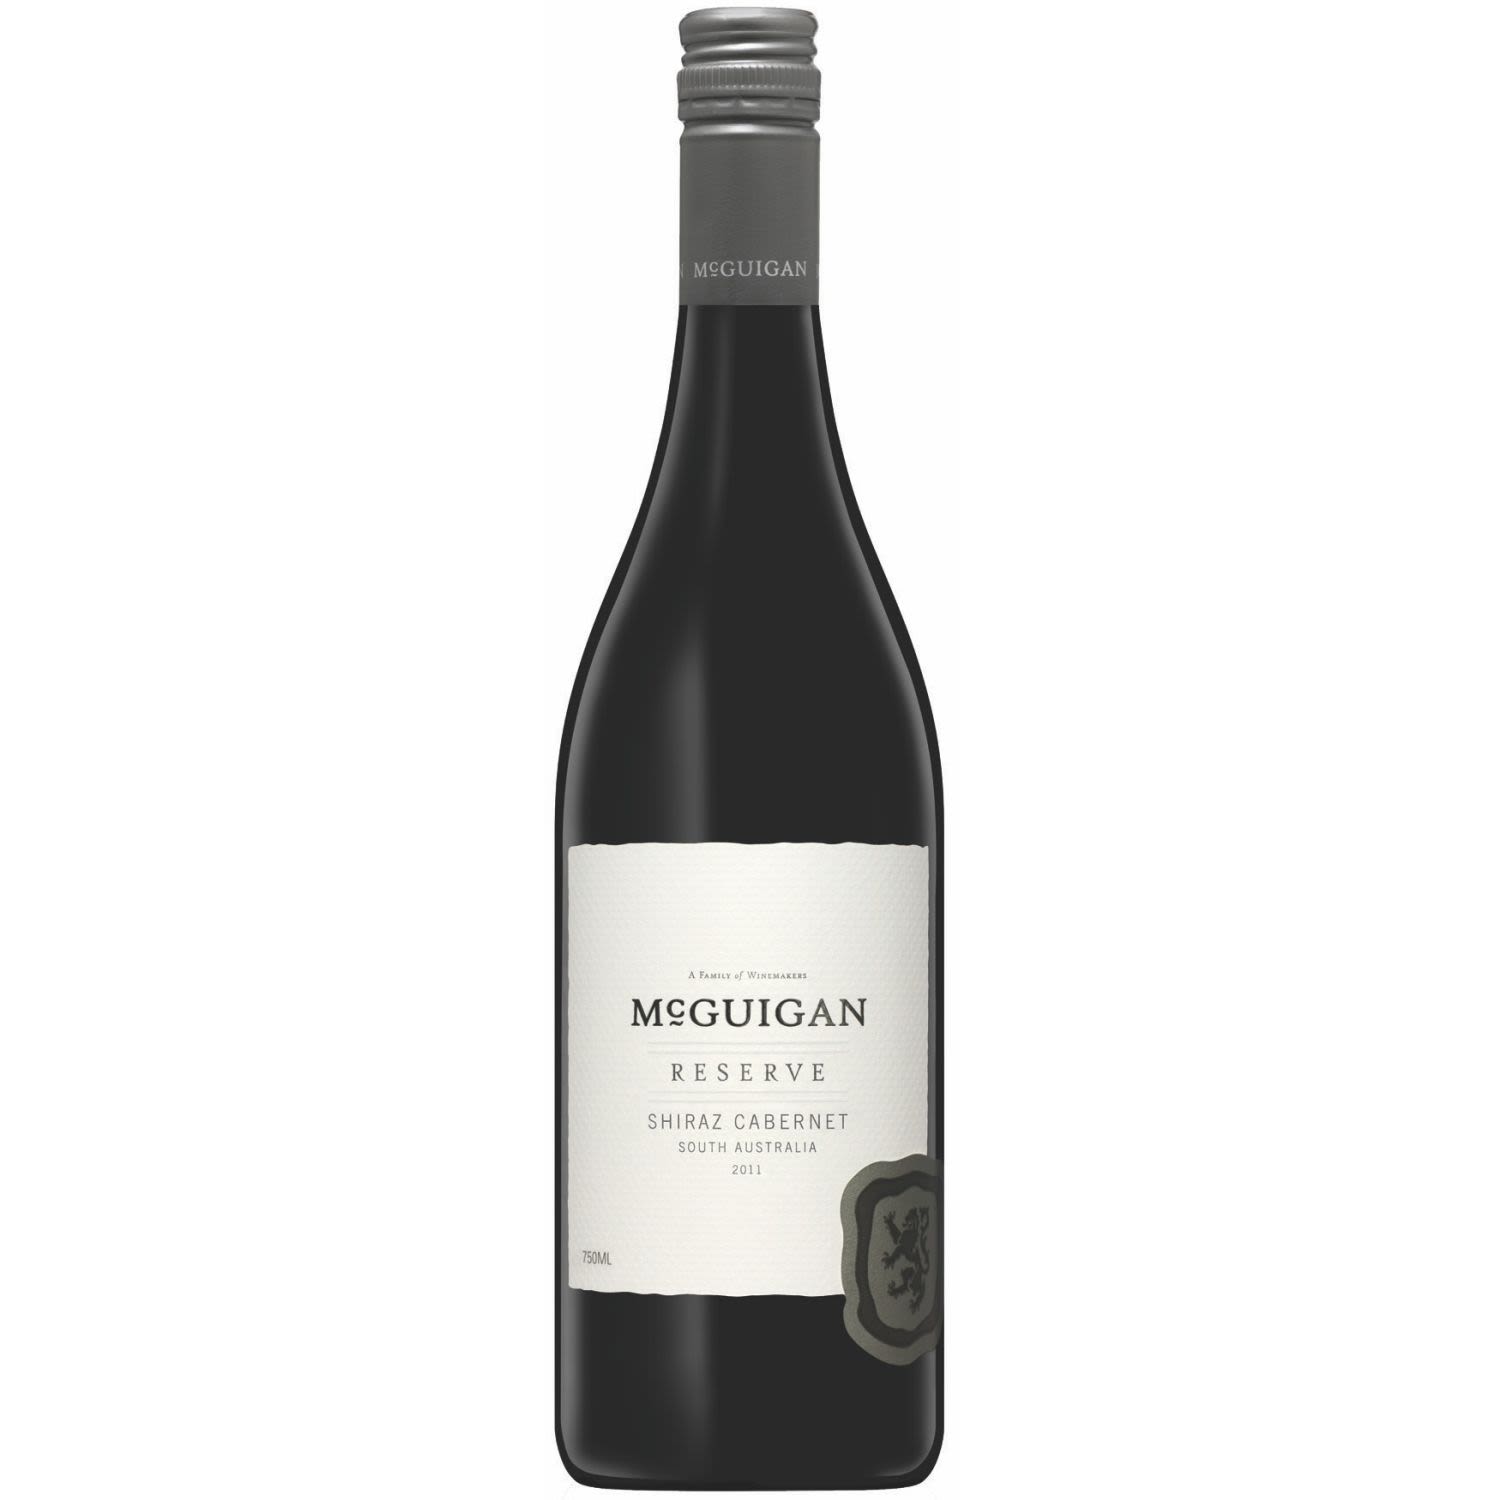 The McGuigan Reserve Shiraz Cabernet is a wine of subtle complexity and vibrant red and dark berry aromas. Oak maturation provides subtle vanilla characters and soft, supple tannins on the finish.<br /> <br />Alcohol Volume: 14.00%<br /><br />Pack Format: Bottle<br /><br />Standard Drinks: 8.3</br /><br />Pack Type: Bottle<br /><br />Country of Origin: Australia<br /><br />Region: South Eastern Australia<br /><br />Vintage: Vintages Vary<br />